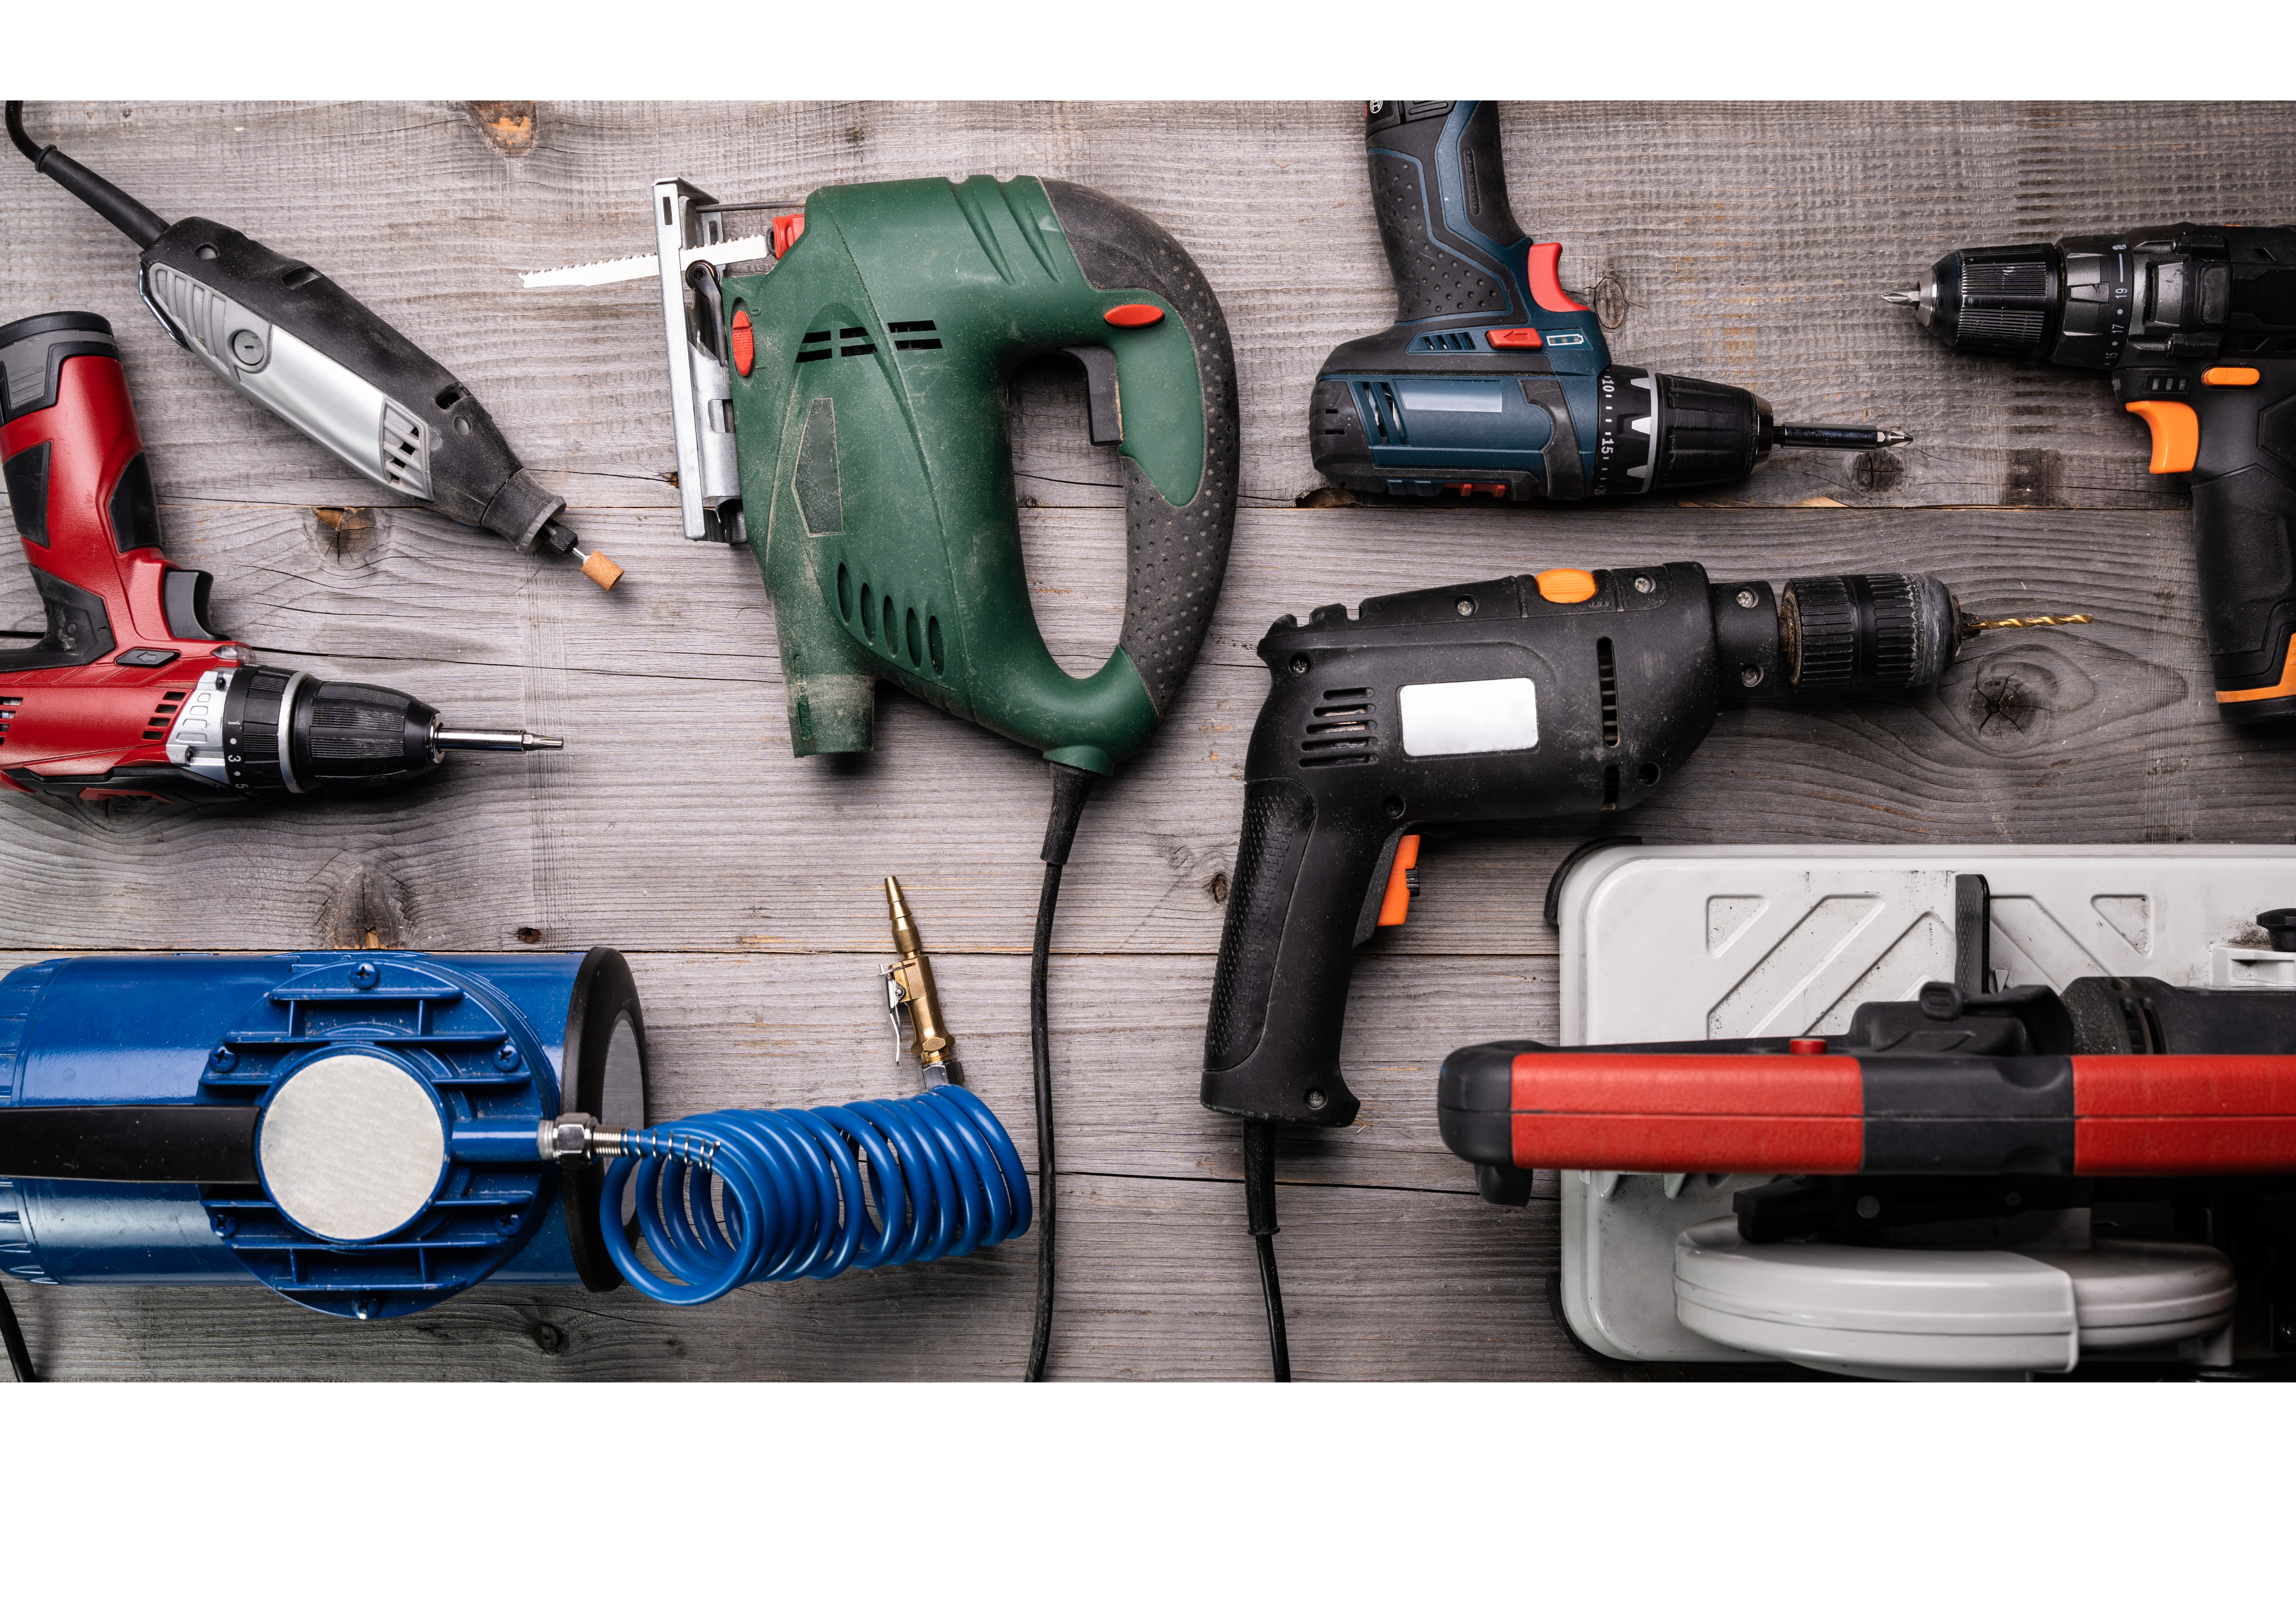 Safe Use of Power Tools Training